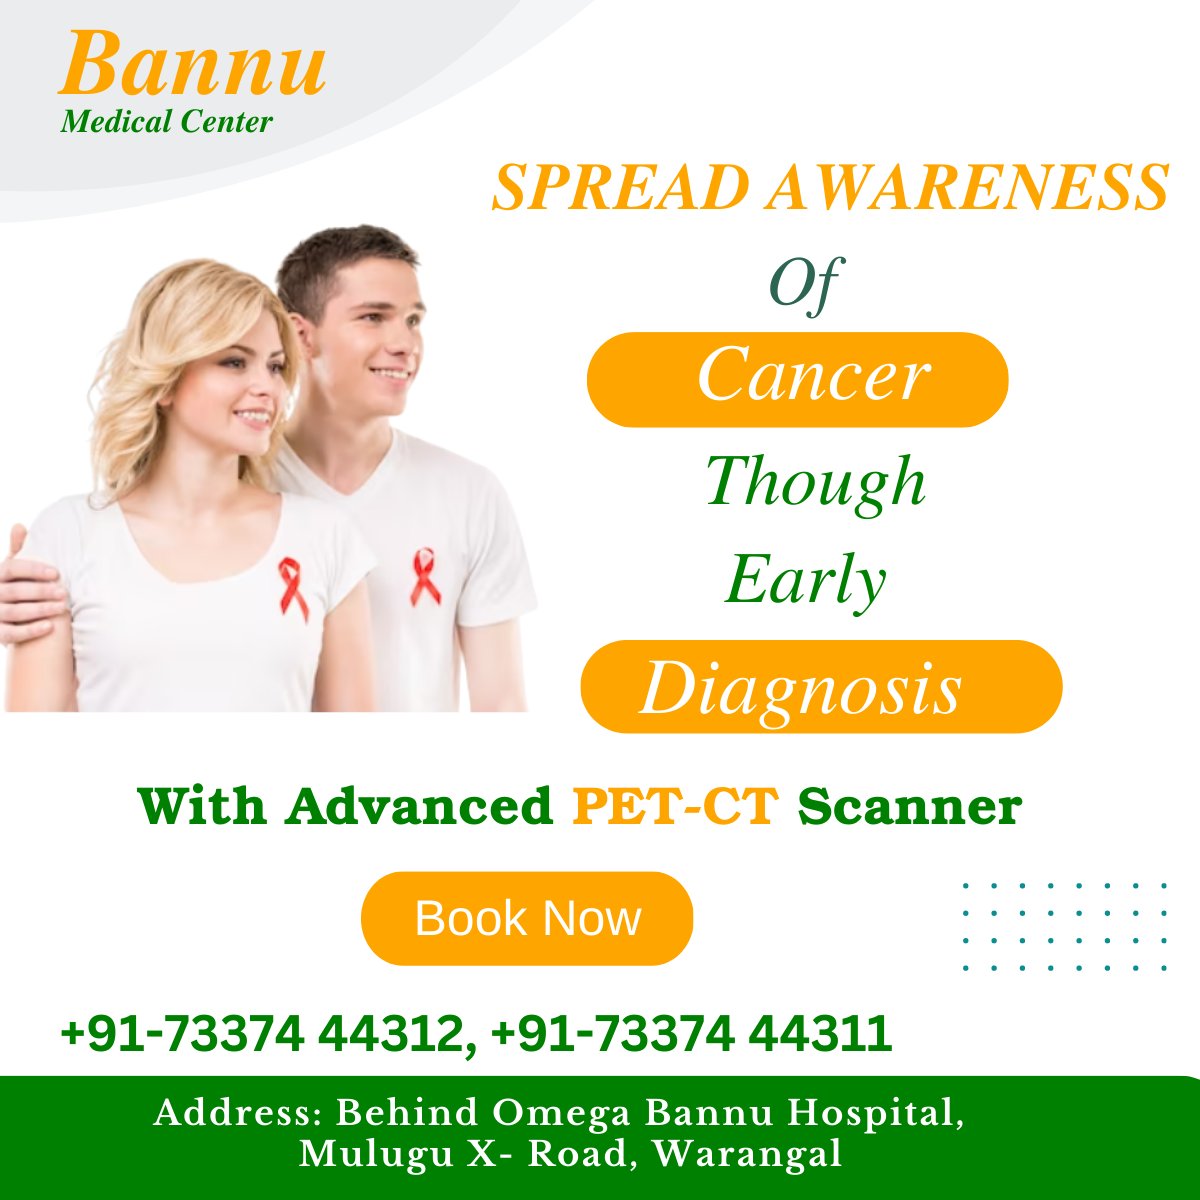 Cancer is a diseases, not a taboo. We can manage it better with early diagnosis and awareness.

To book your appointment, call us @ 7337444311, 7337444312

#petct #petctscan #psmapetscan #bannumedicalcenter #wholebodyscan #physiotherapyservices #earlydetection #cancerdetection